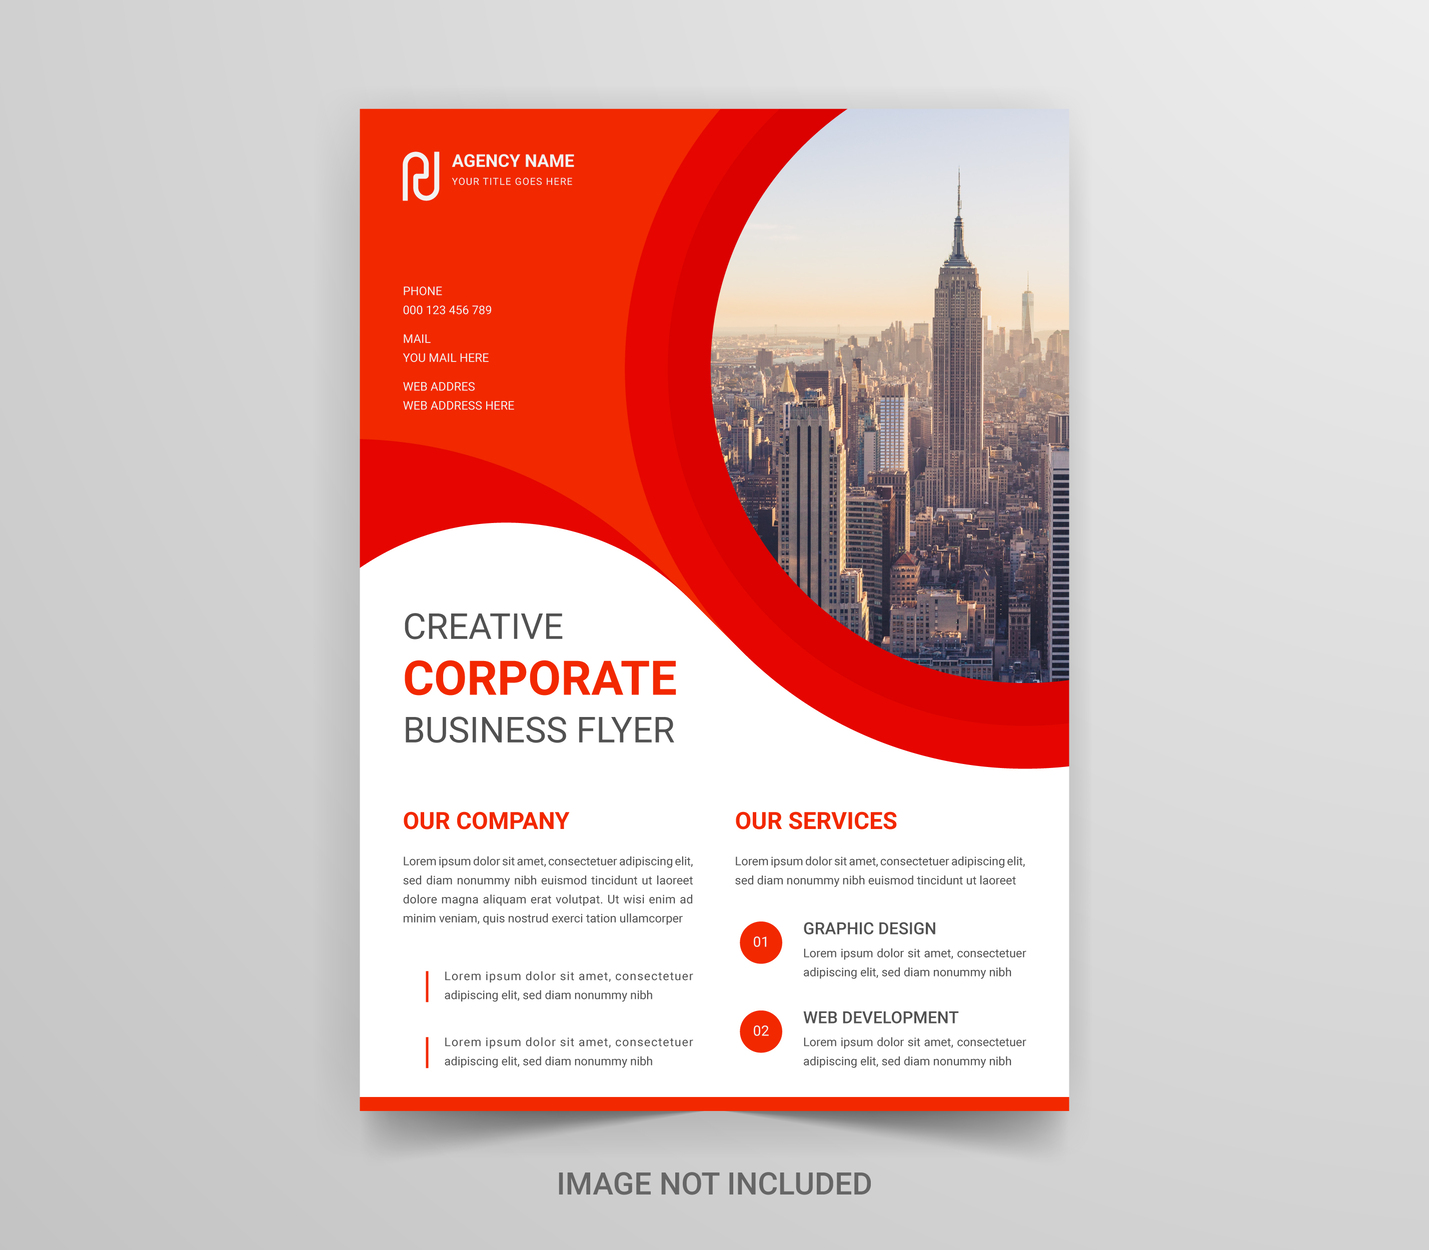 company profile design charges